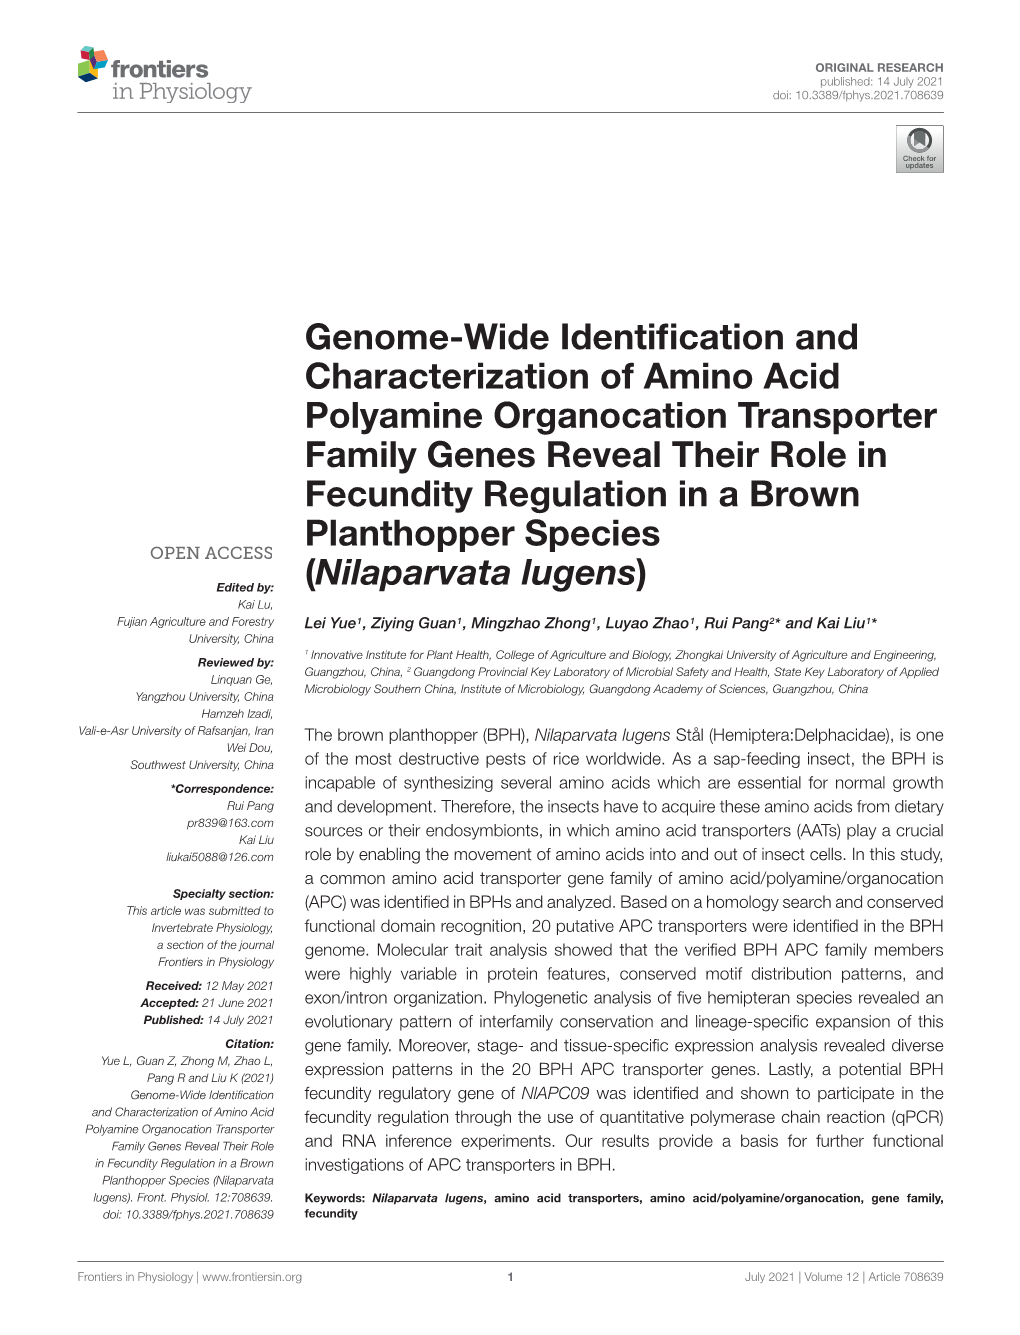 Genome-Wide Identification and Characterization of Amino Acid